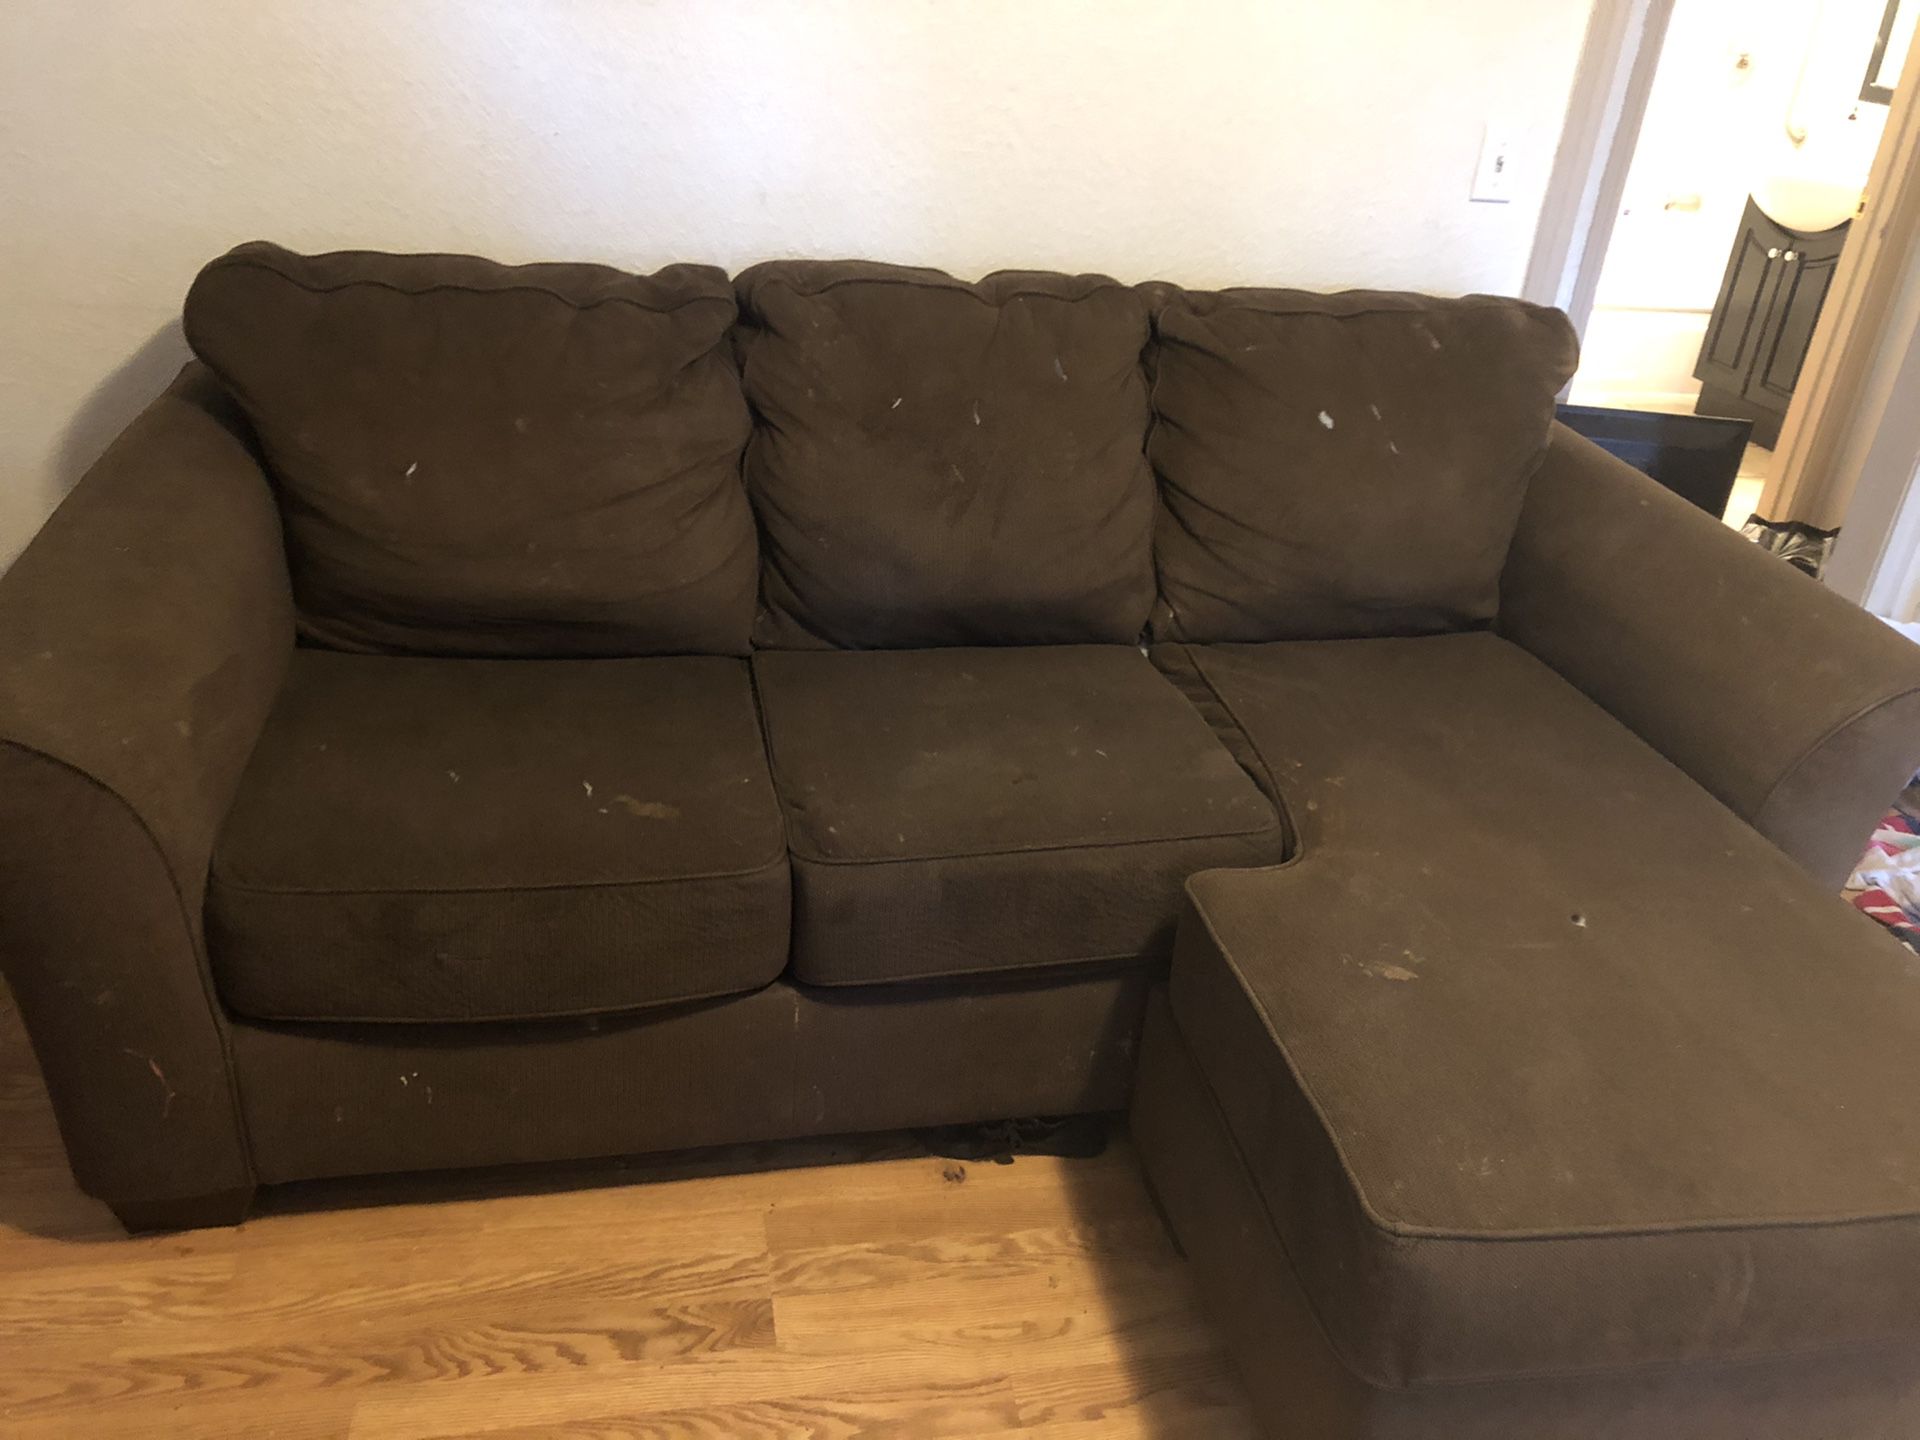 Couch*pick up today*